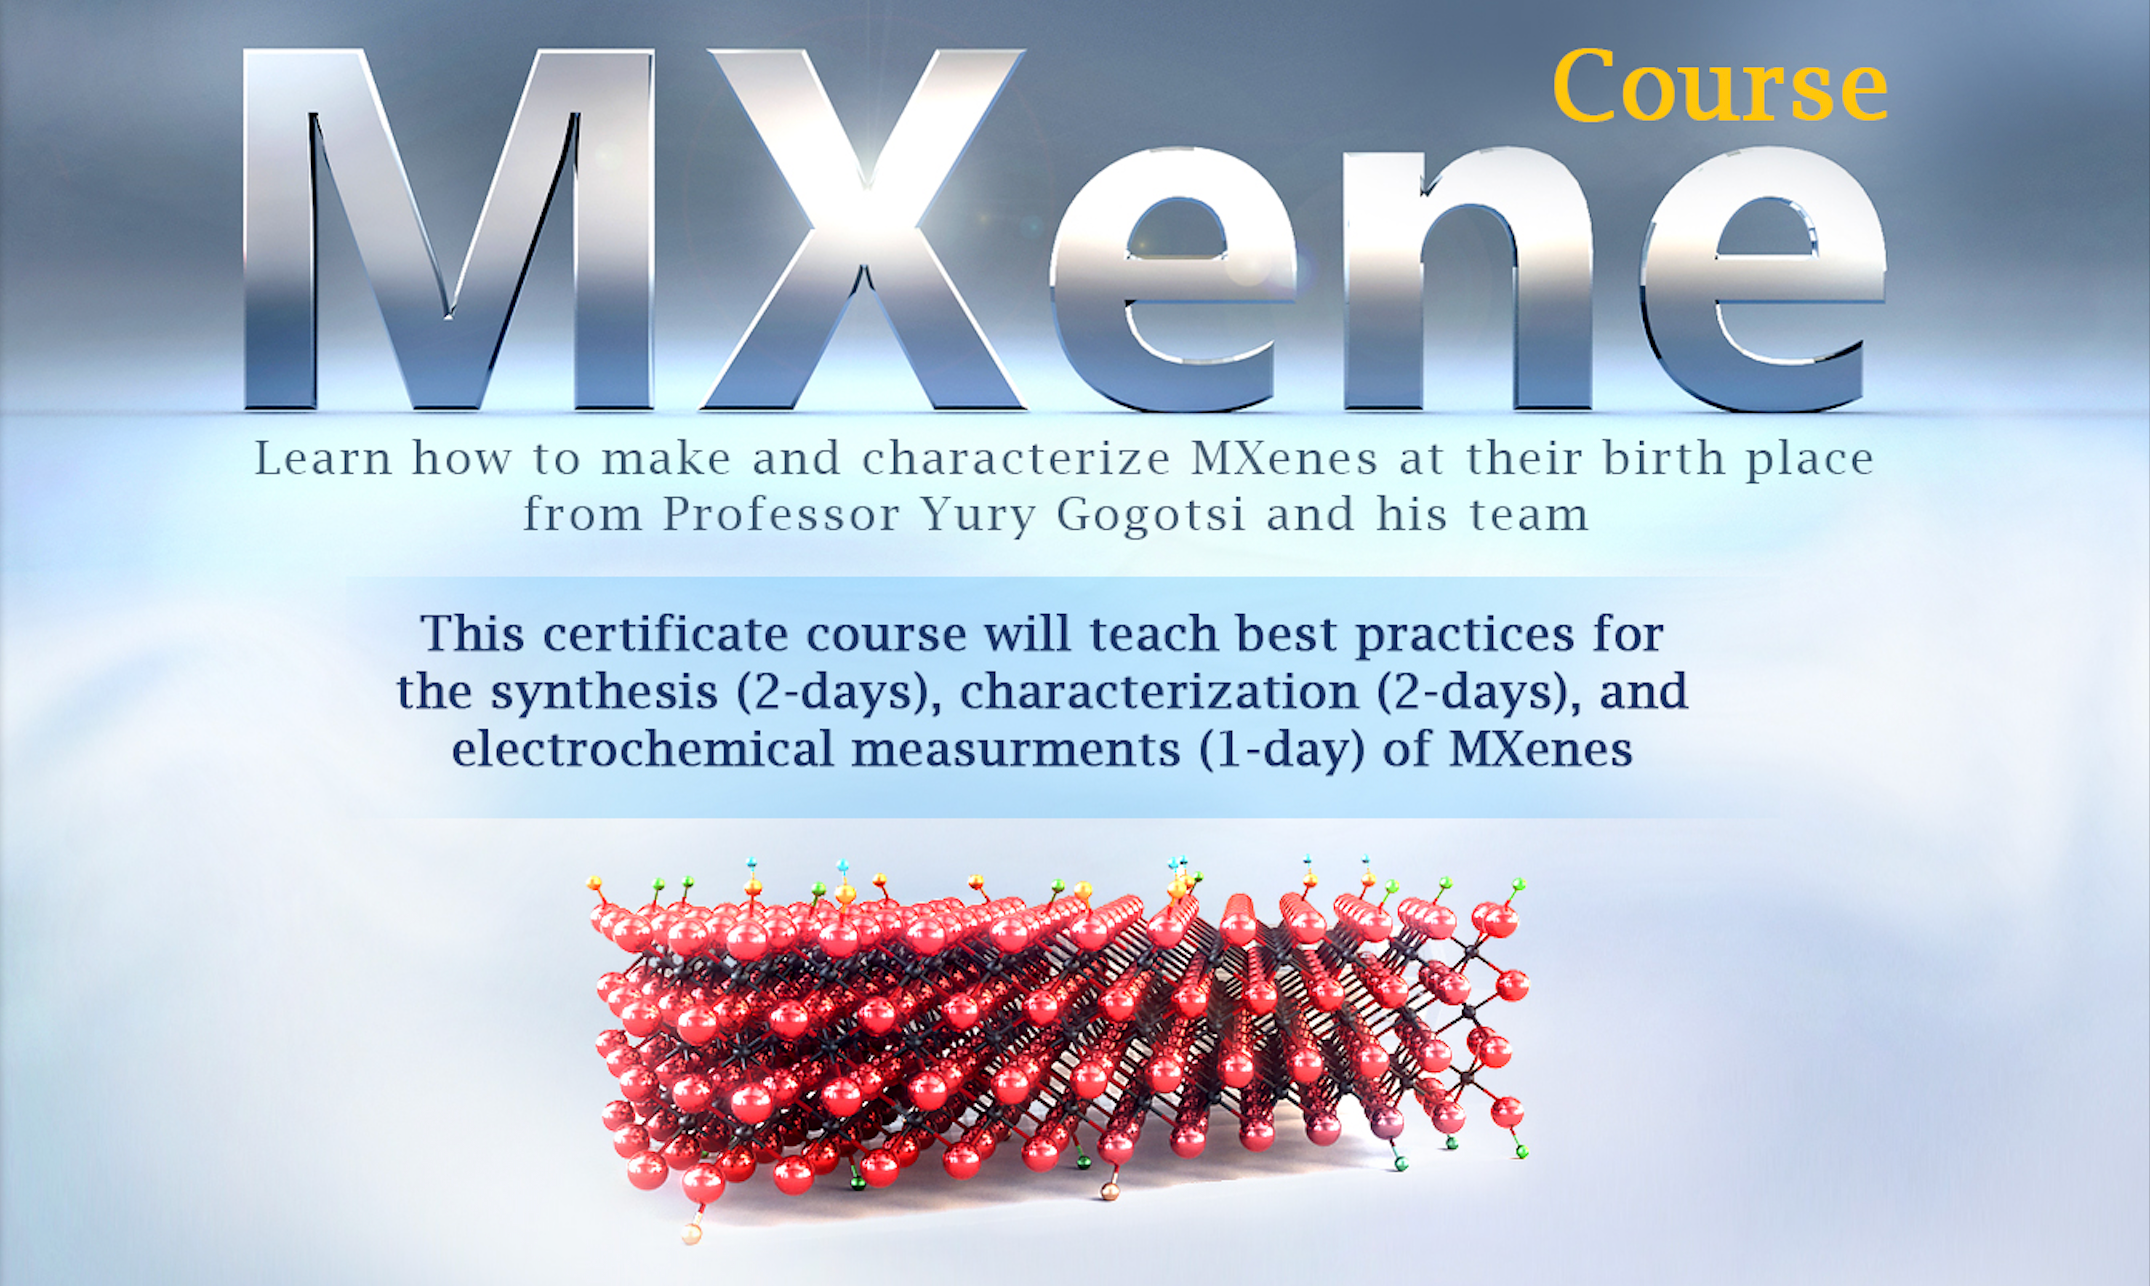 Register Now For The Upcoming MXene Certificate Course, August 2-6, 2021